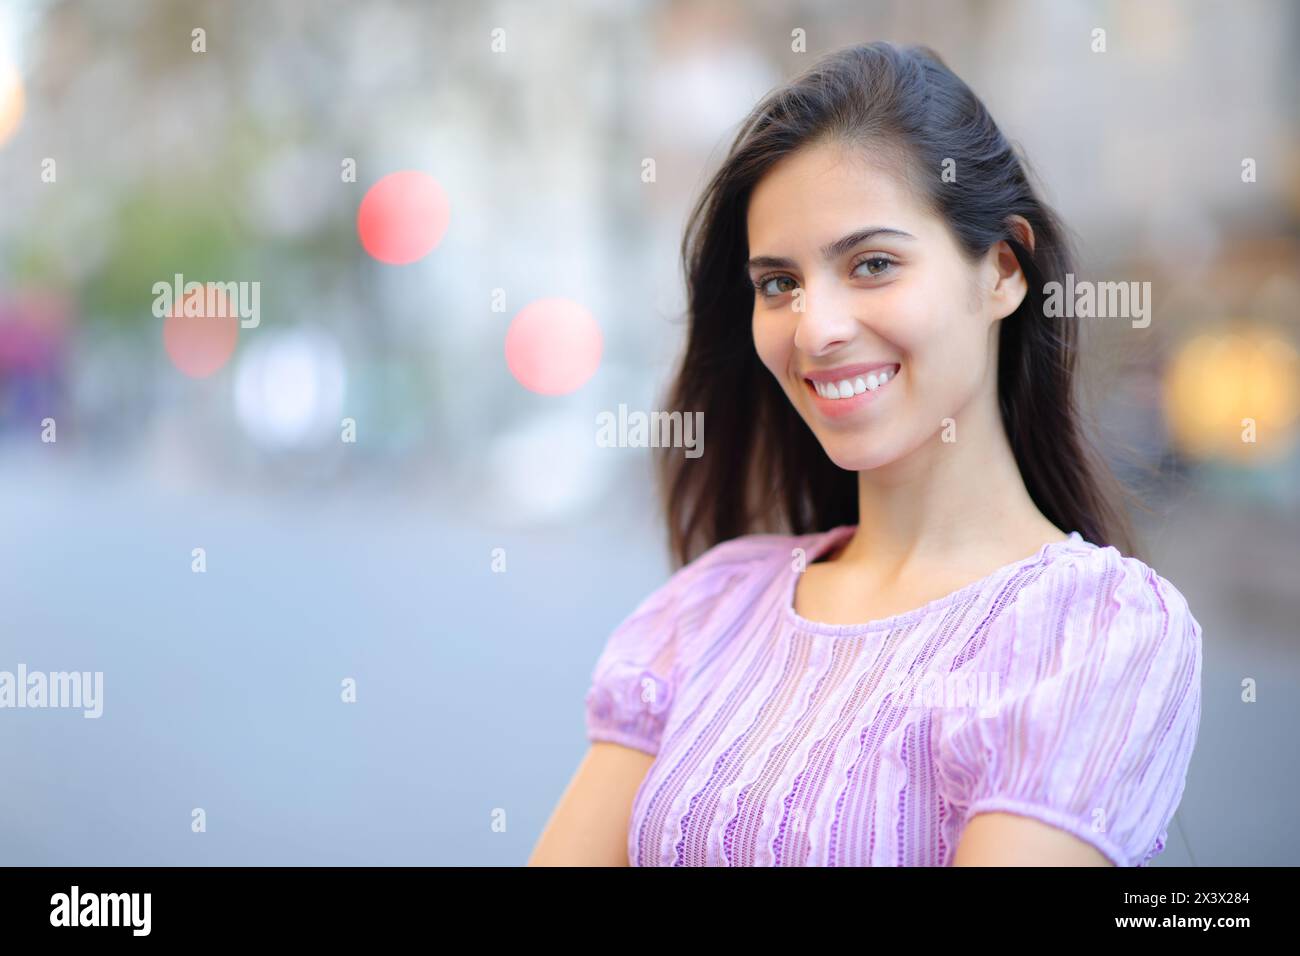 Portrait of a happy woman with perfect smile in the street looking at camera Stock Photo